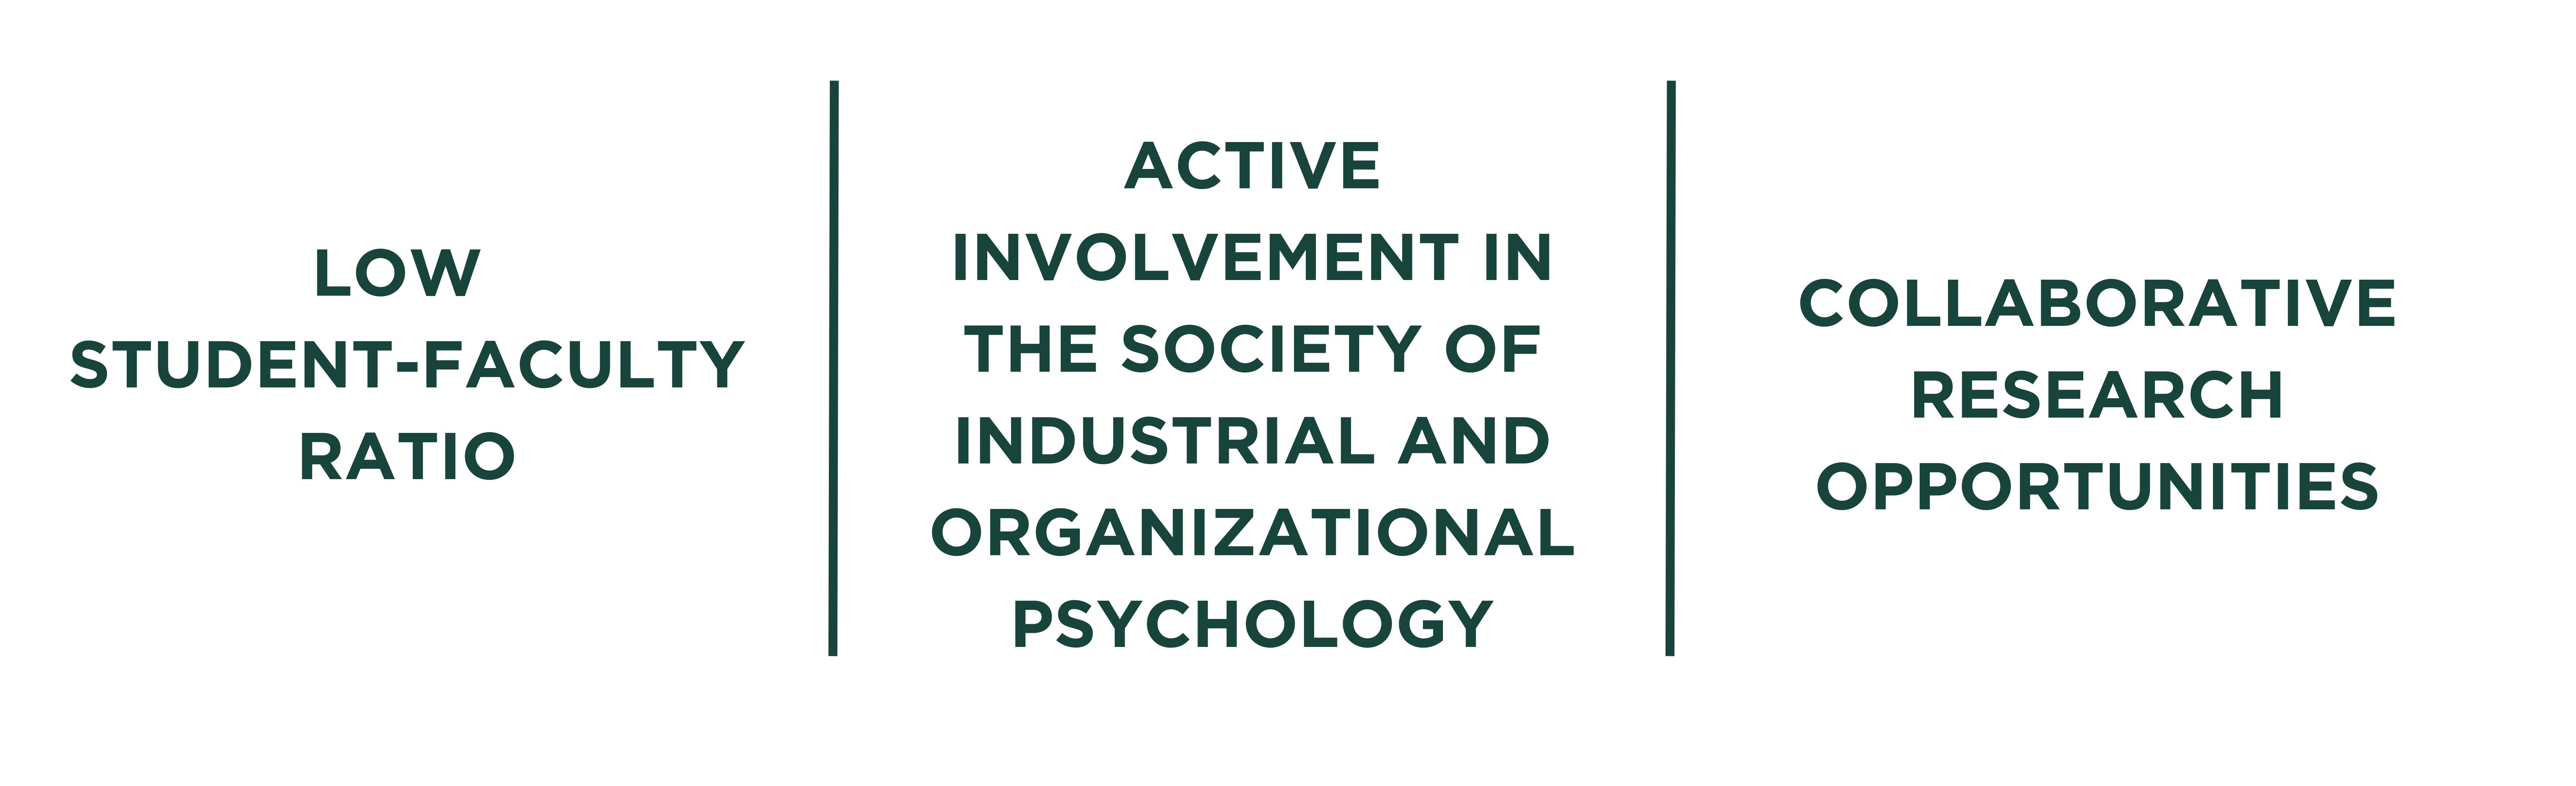 Graphic that says "Low Student-Faculty Ratio", "Active involvement in the Society of Industrial and Organizational Psychology" and "Collaborative Research Opportunities"